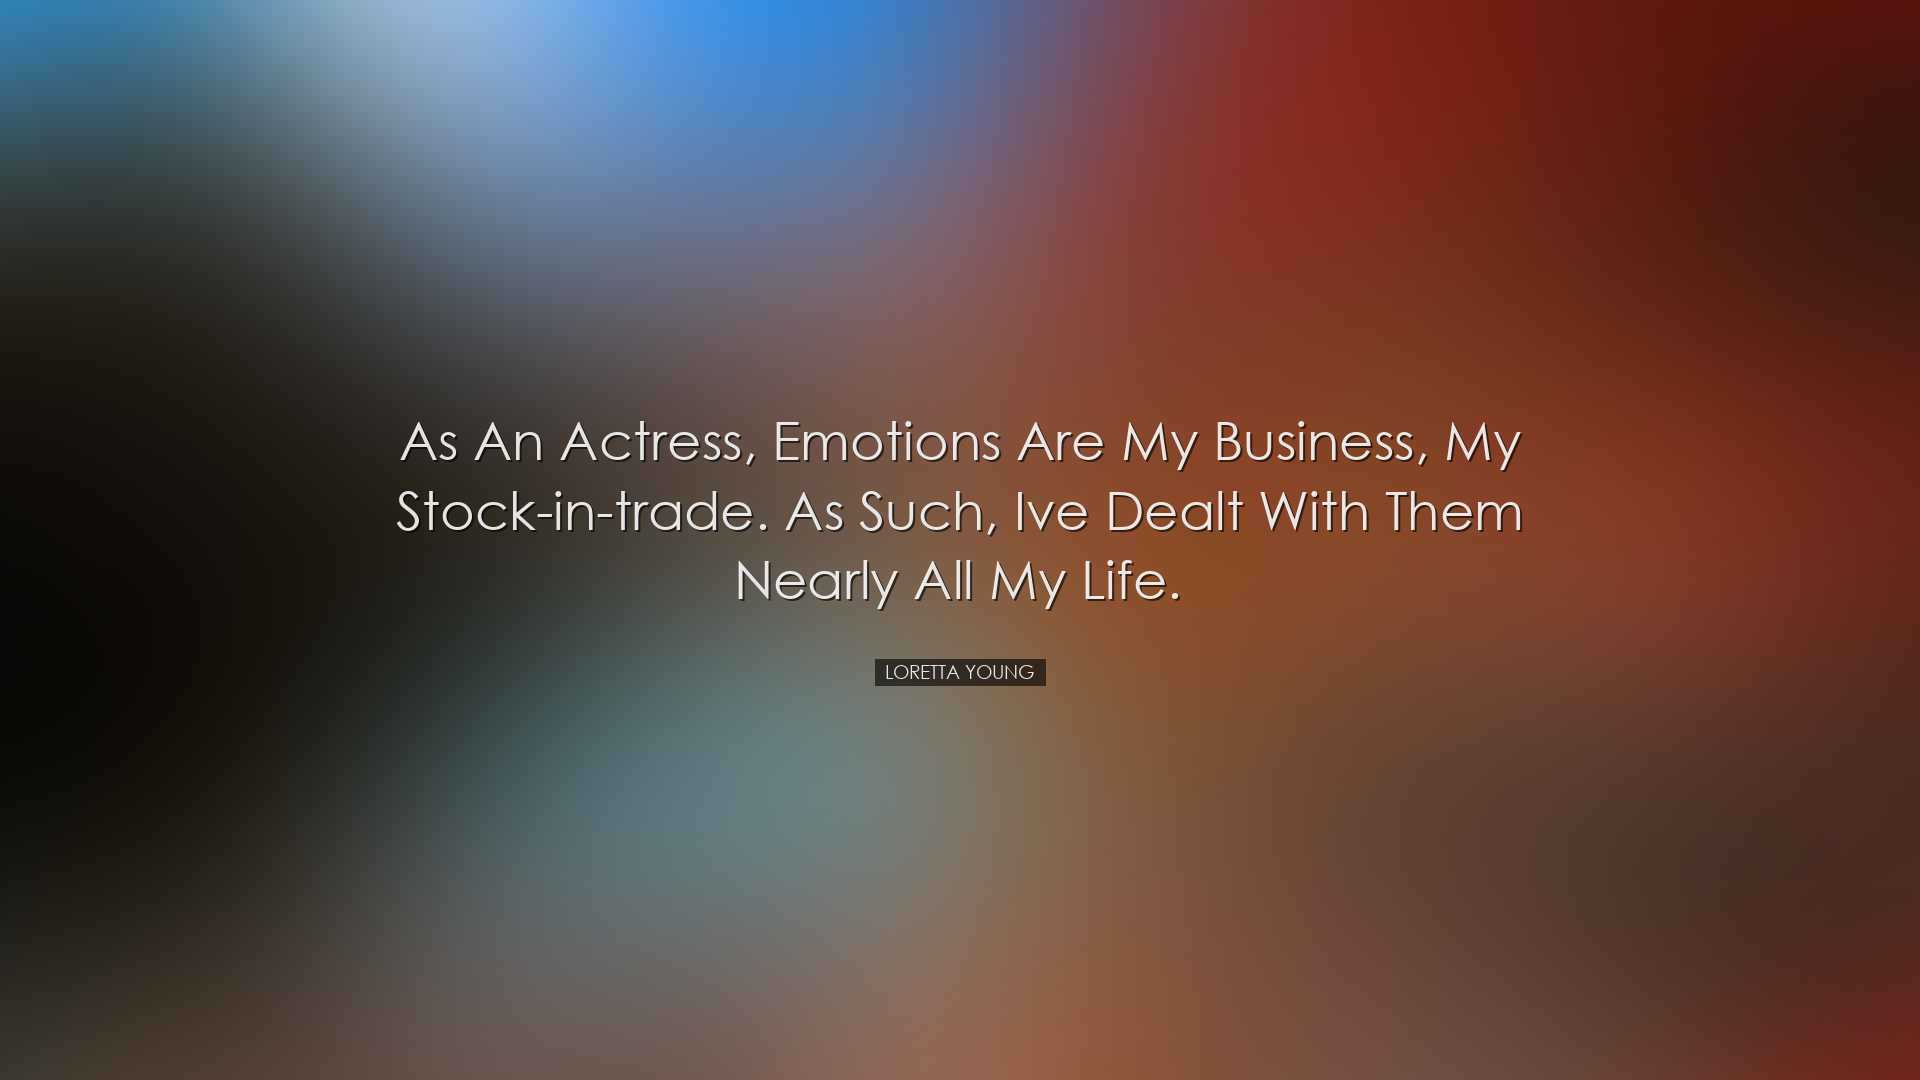 As an actress, emotions are my business, my stock-in-trade. As suc